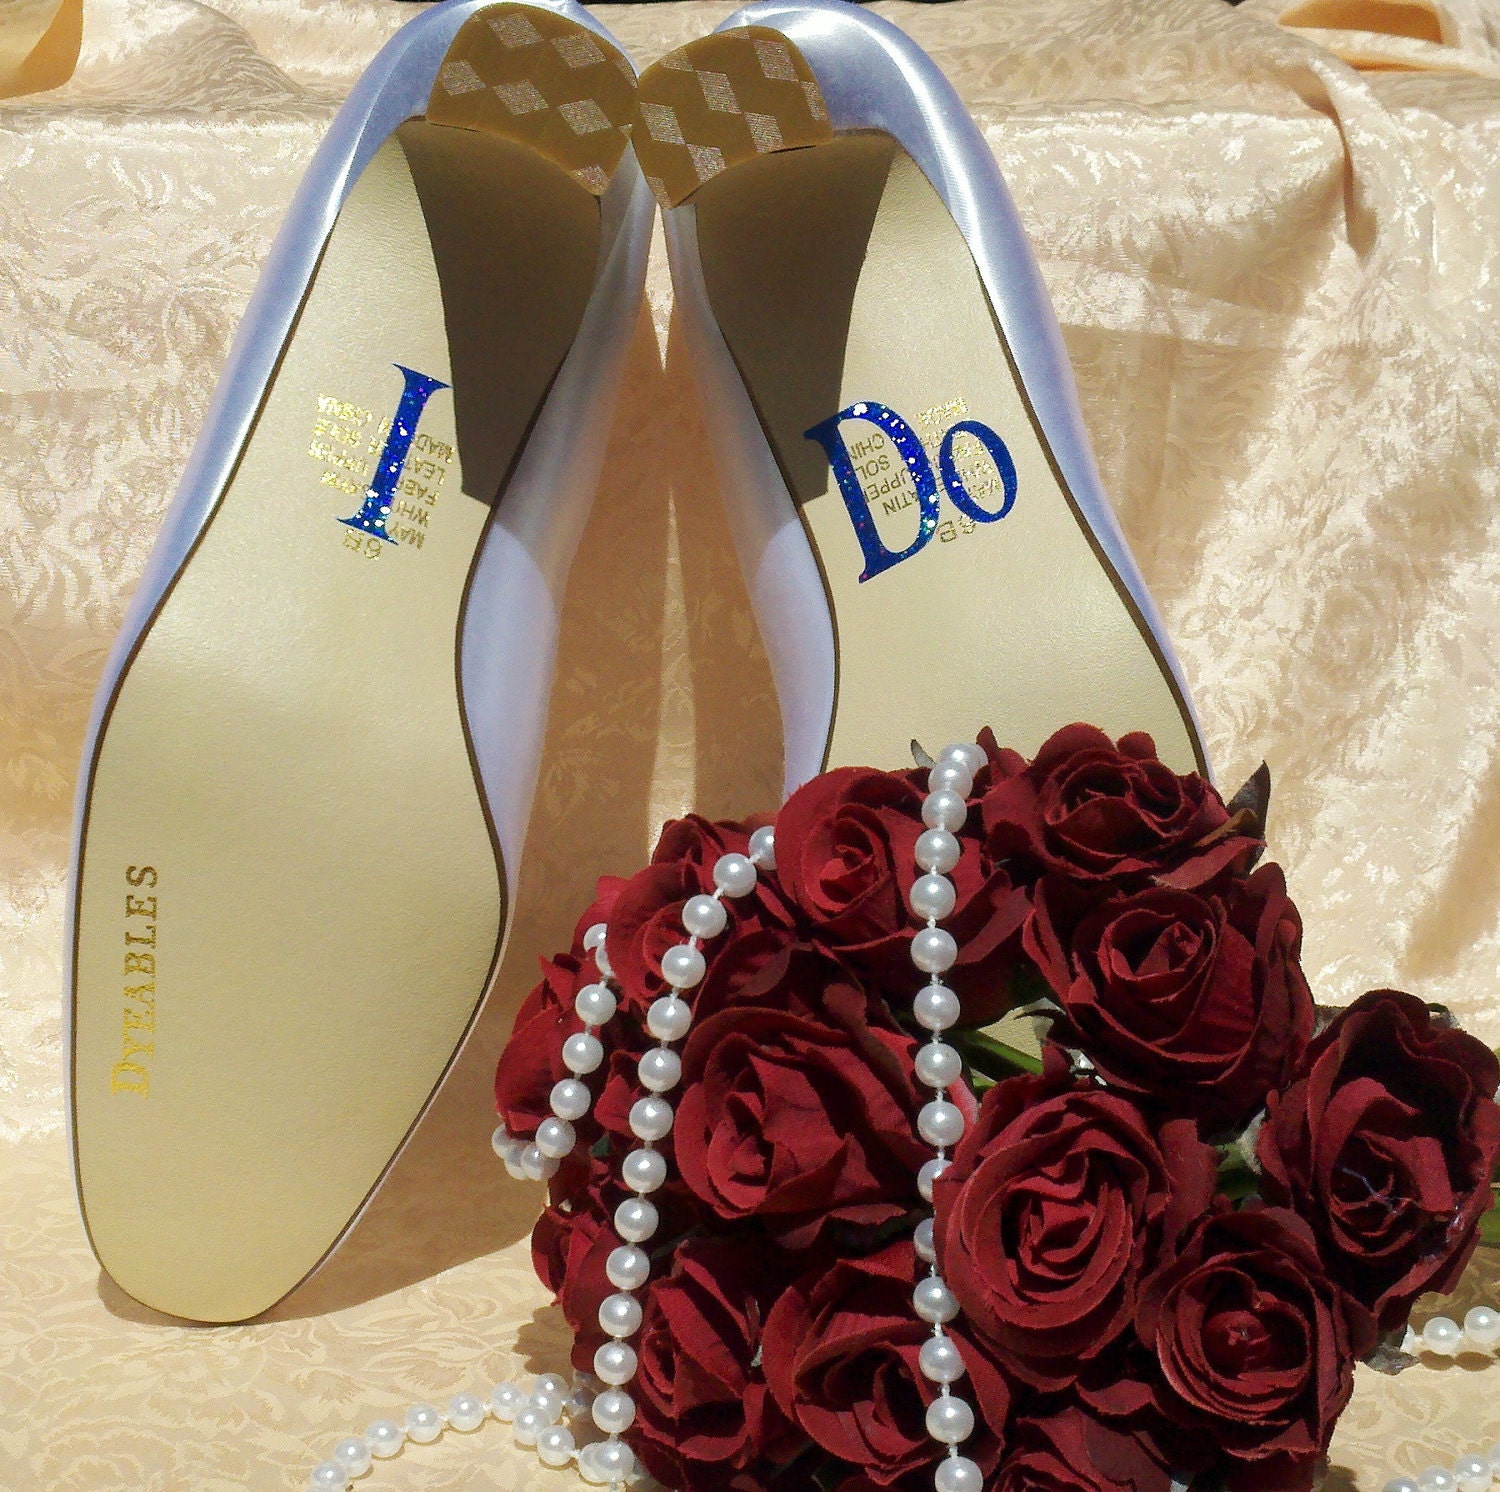 I especially love the I do bling underneath the blue wedding shoes and